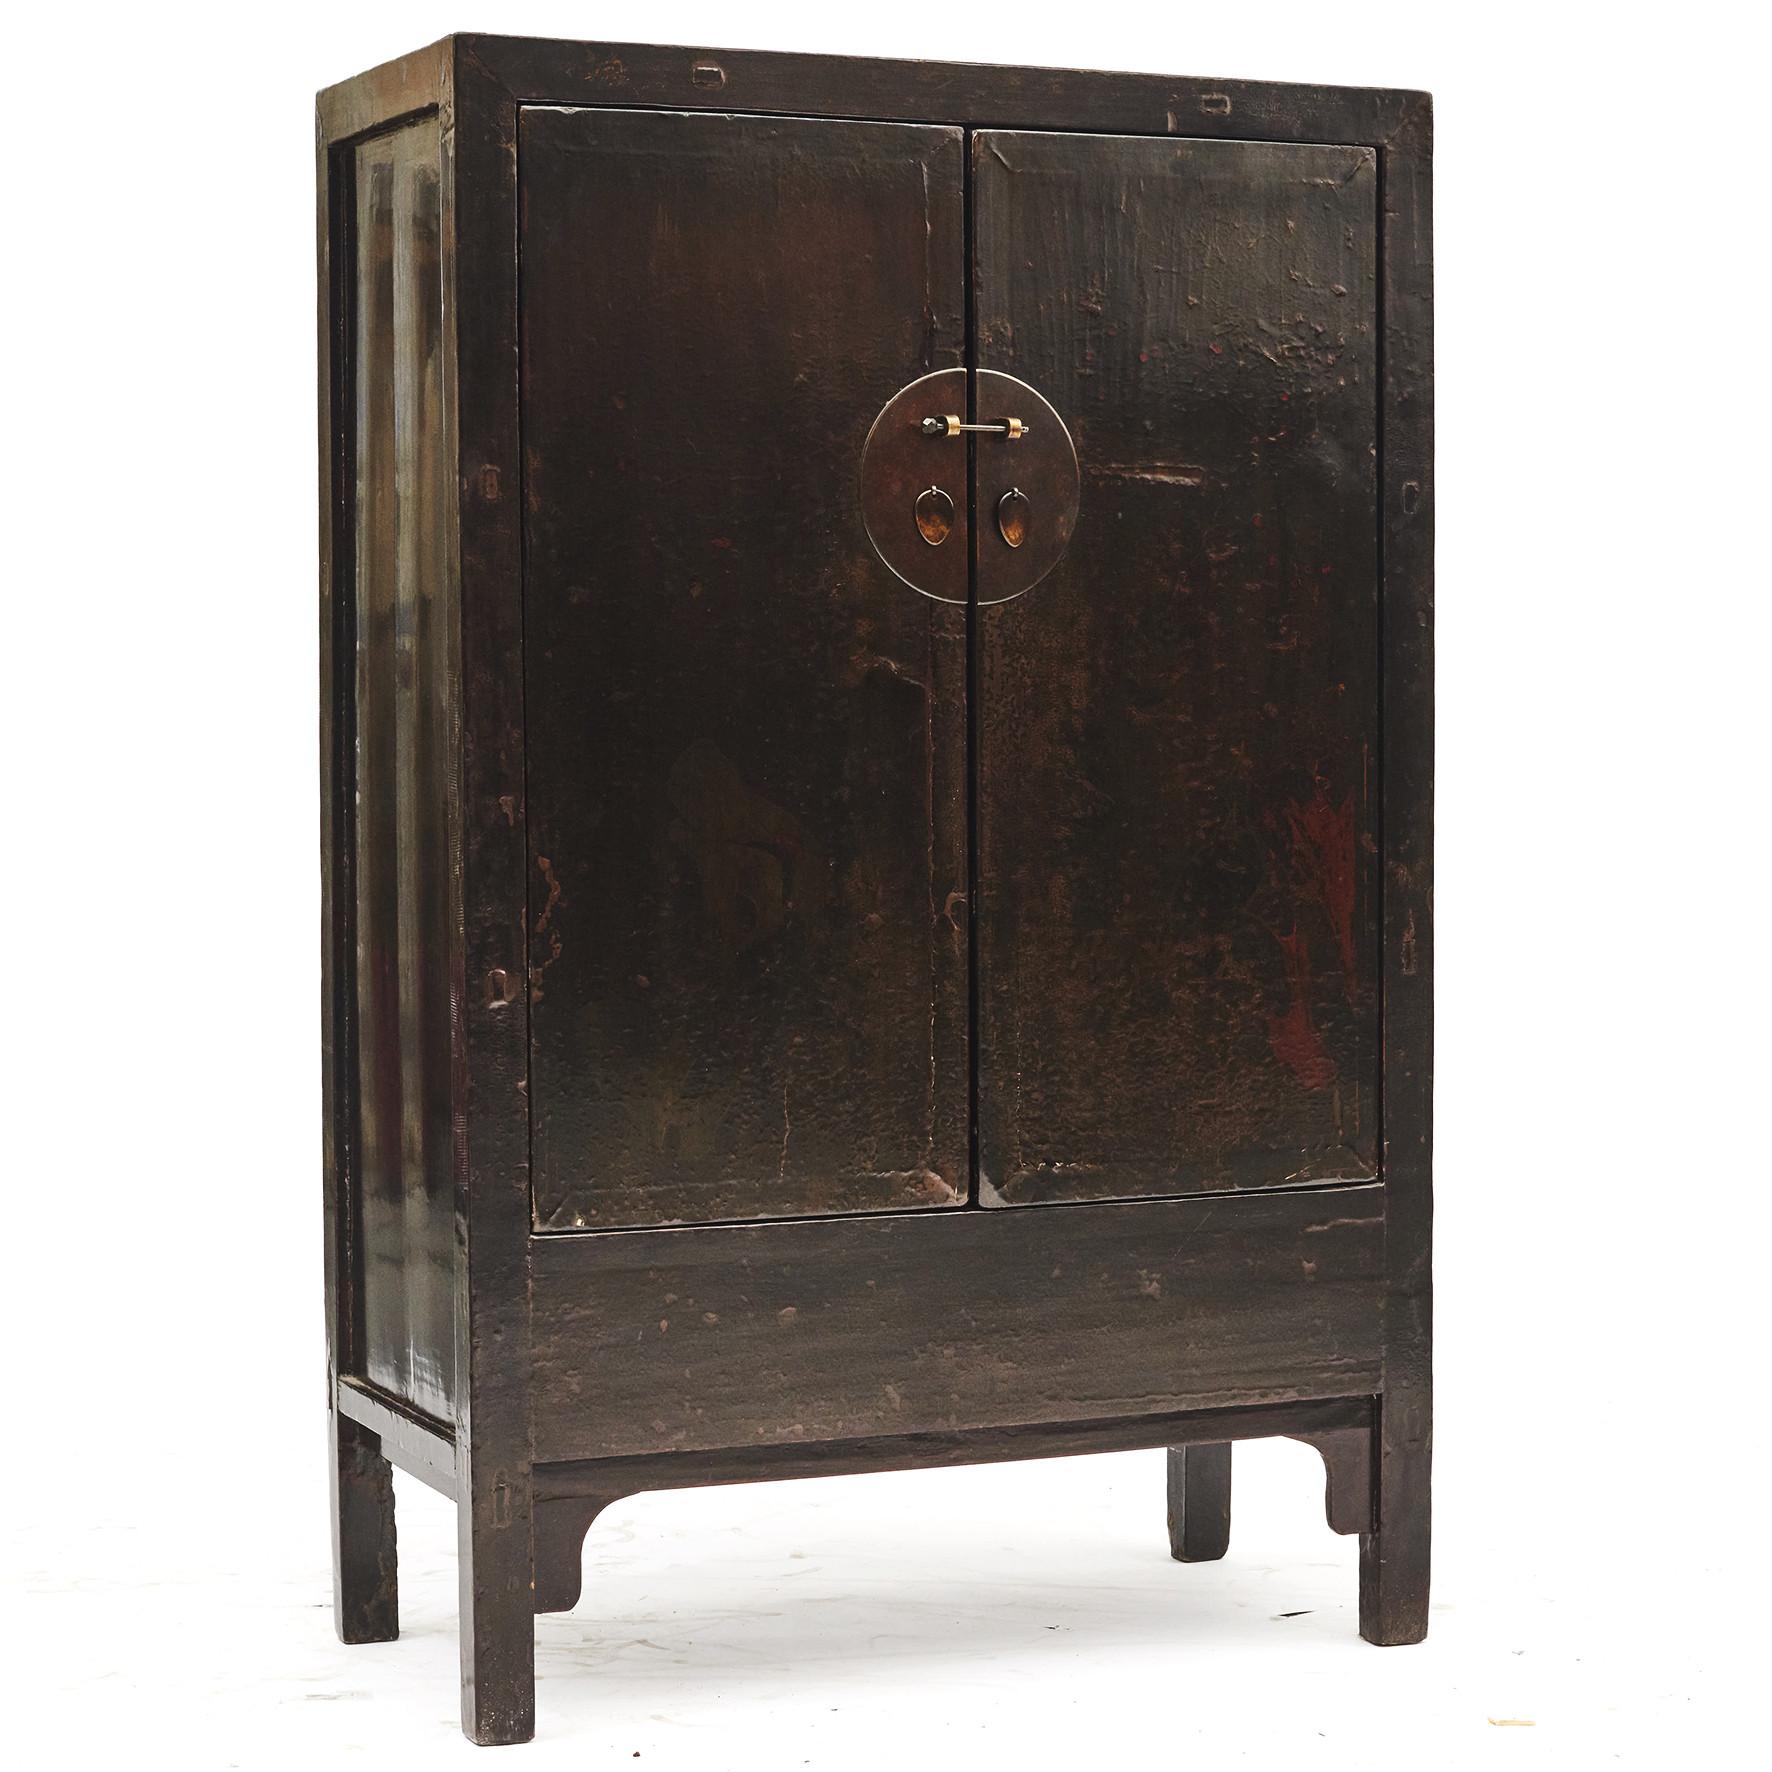 A Chinese Qing dynasty period cabinet.
Original thick black lacquer with red paint remnants from previous decorations. Lovely aged patina highlighted by a clear lacquer finish.
From Shanxi Province, China, 1800-1820.